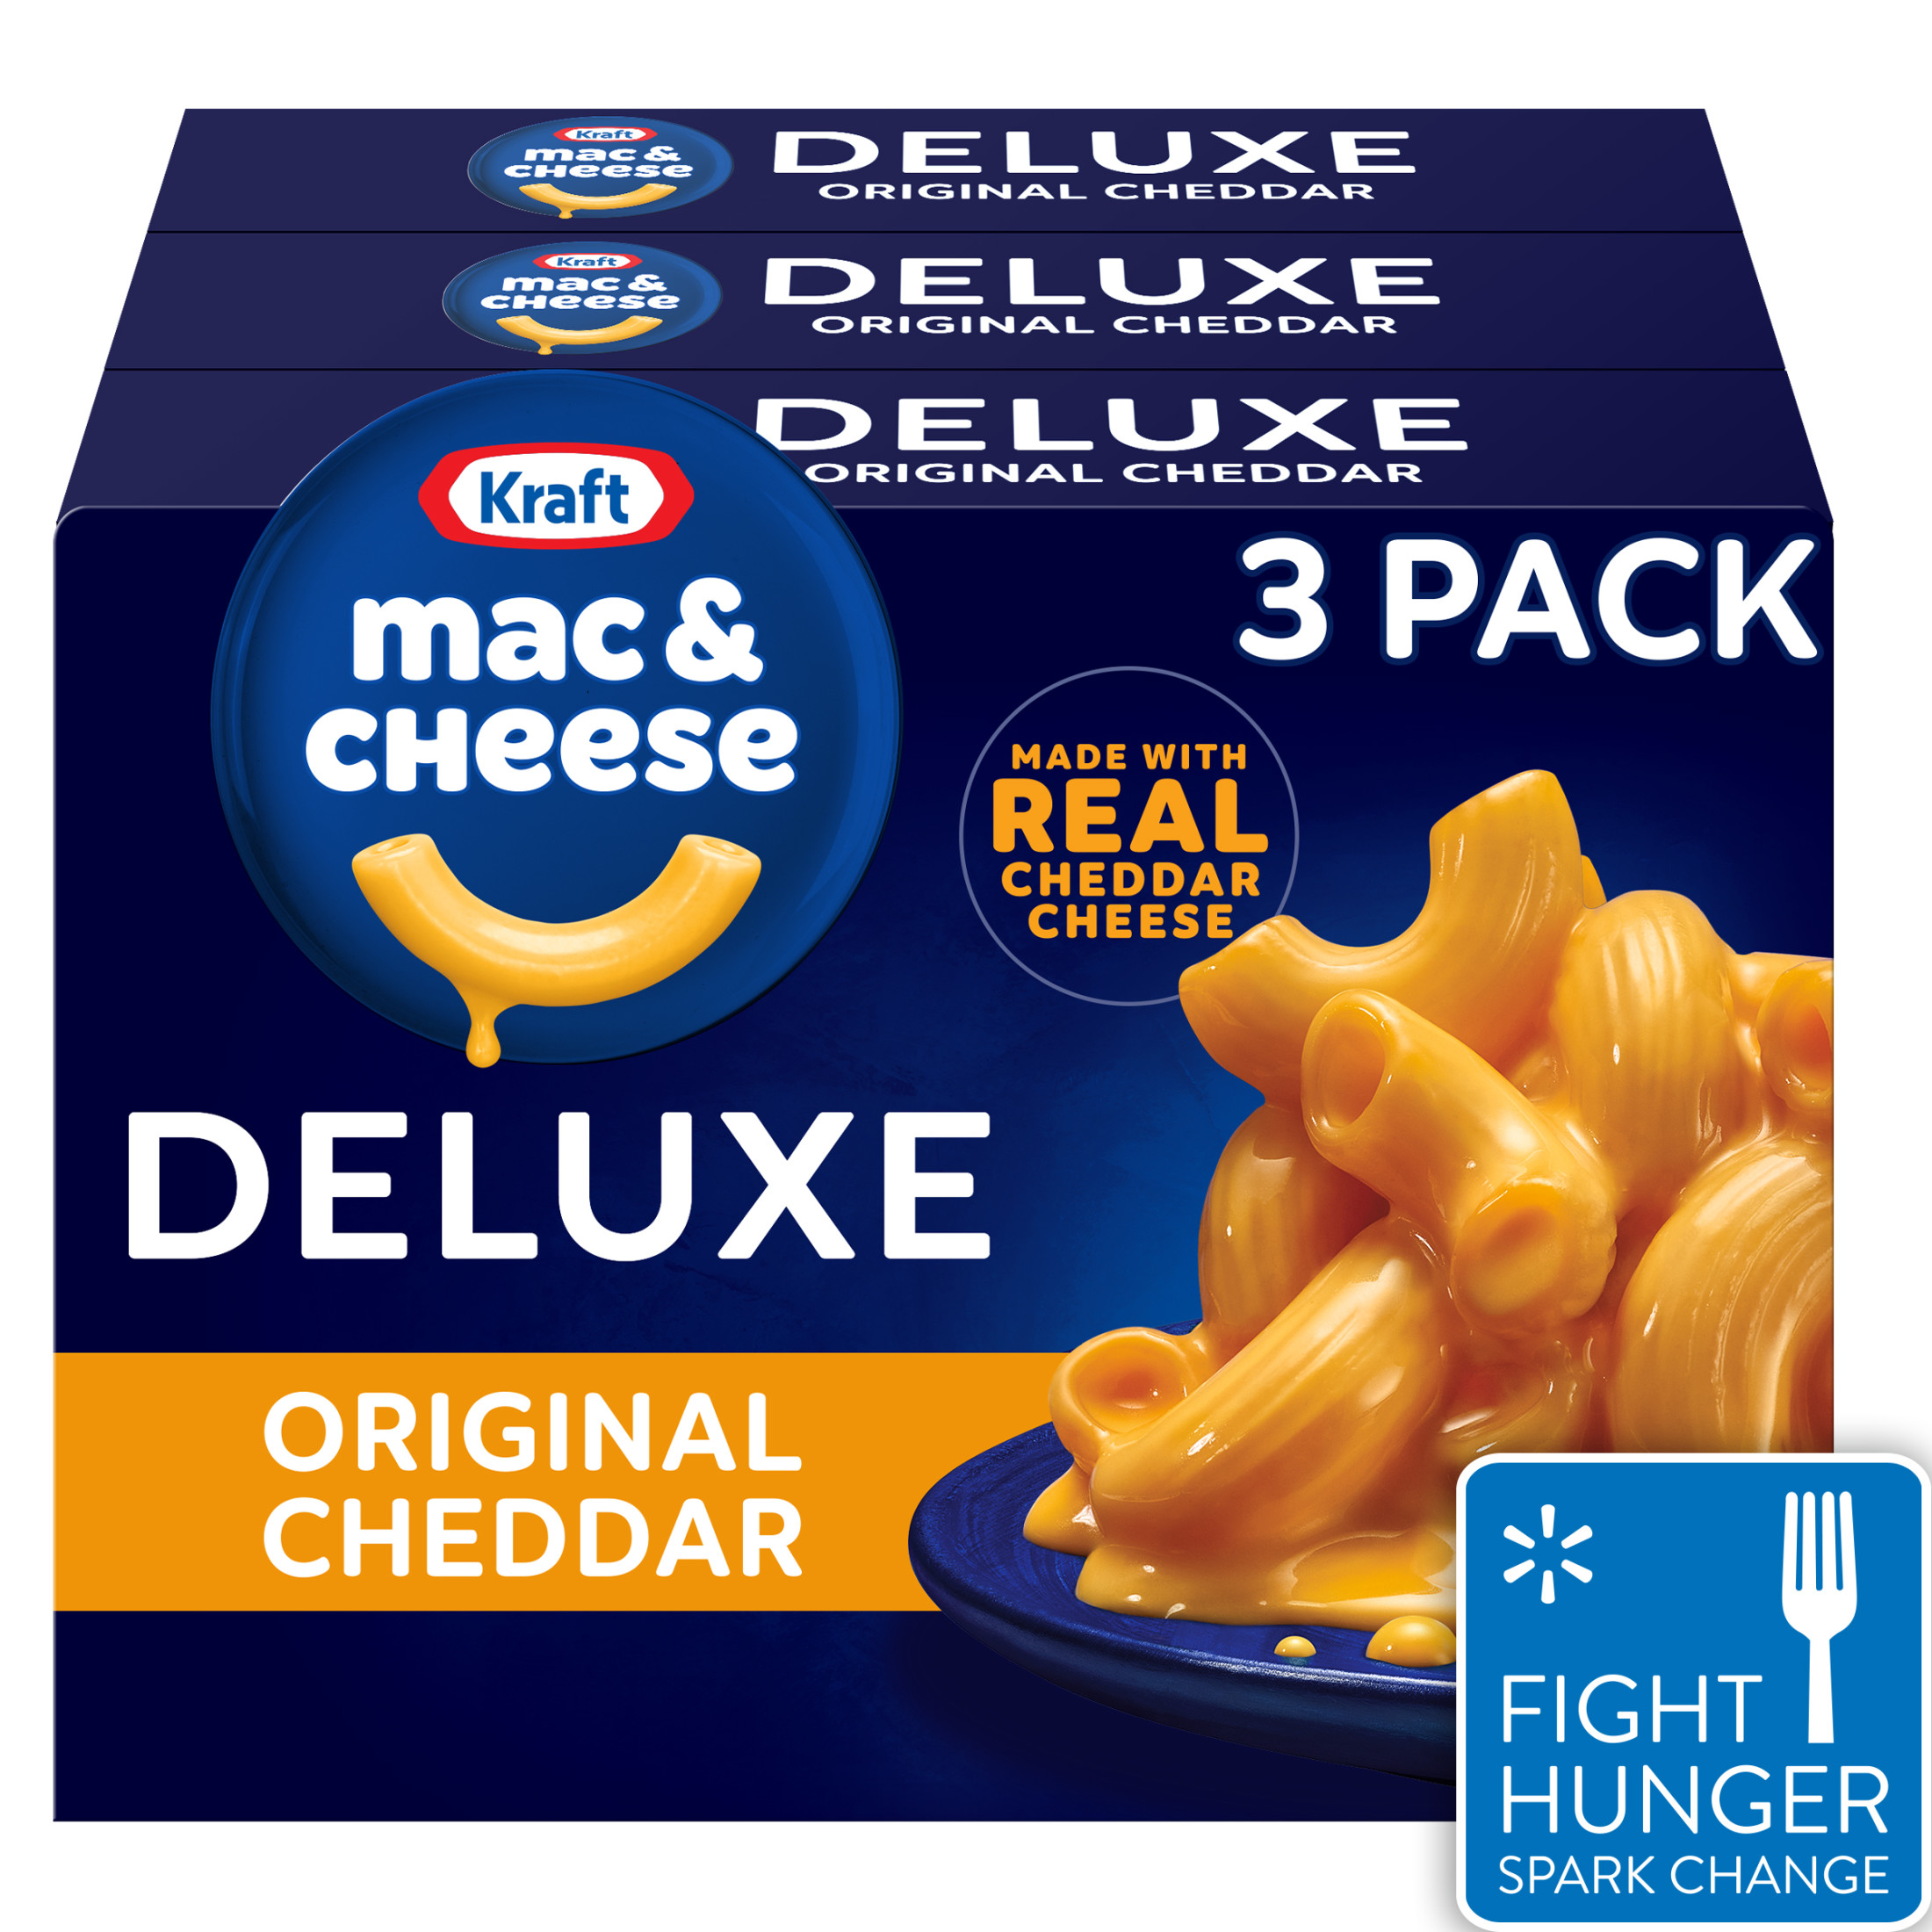 Kraft Deluxe Original Cheddar Mac N Cheese Macaroni and Cheese Dinner, 3 ct Pack, 14 oz Boxes - image 1 of 19